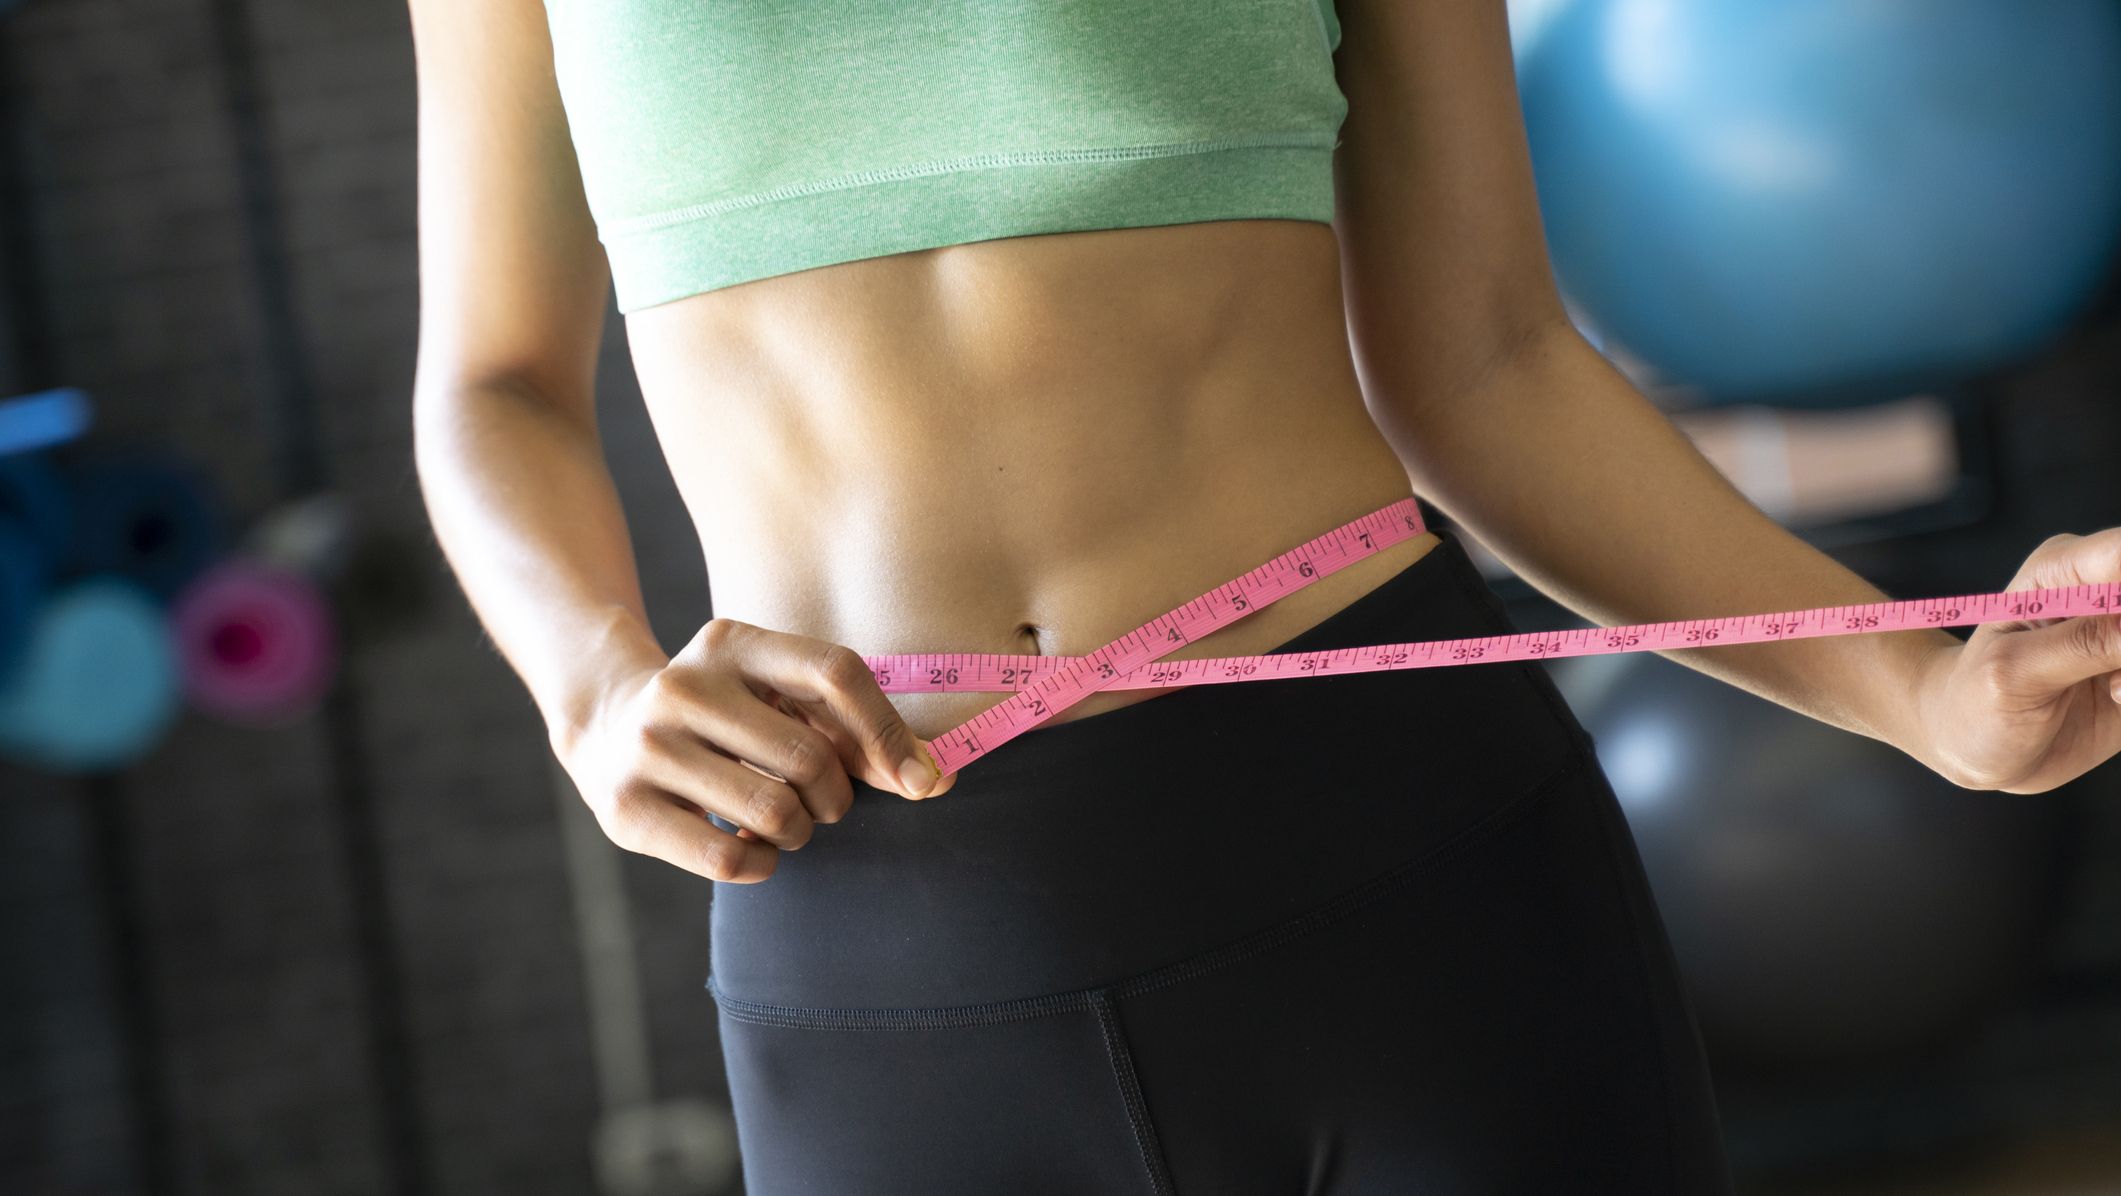 How To Lose Belly Fat, According to Science